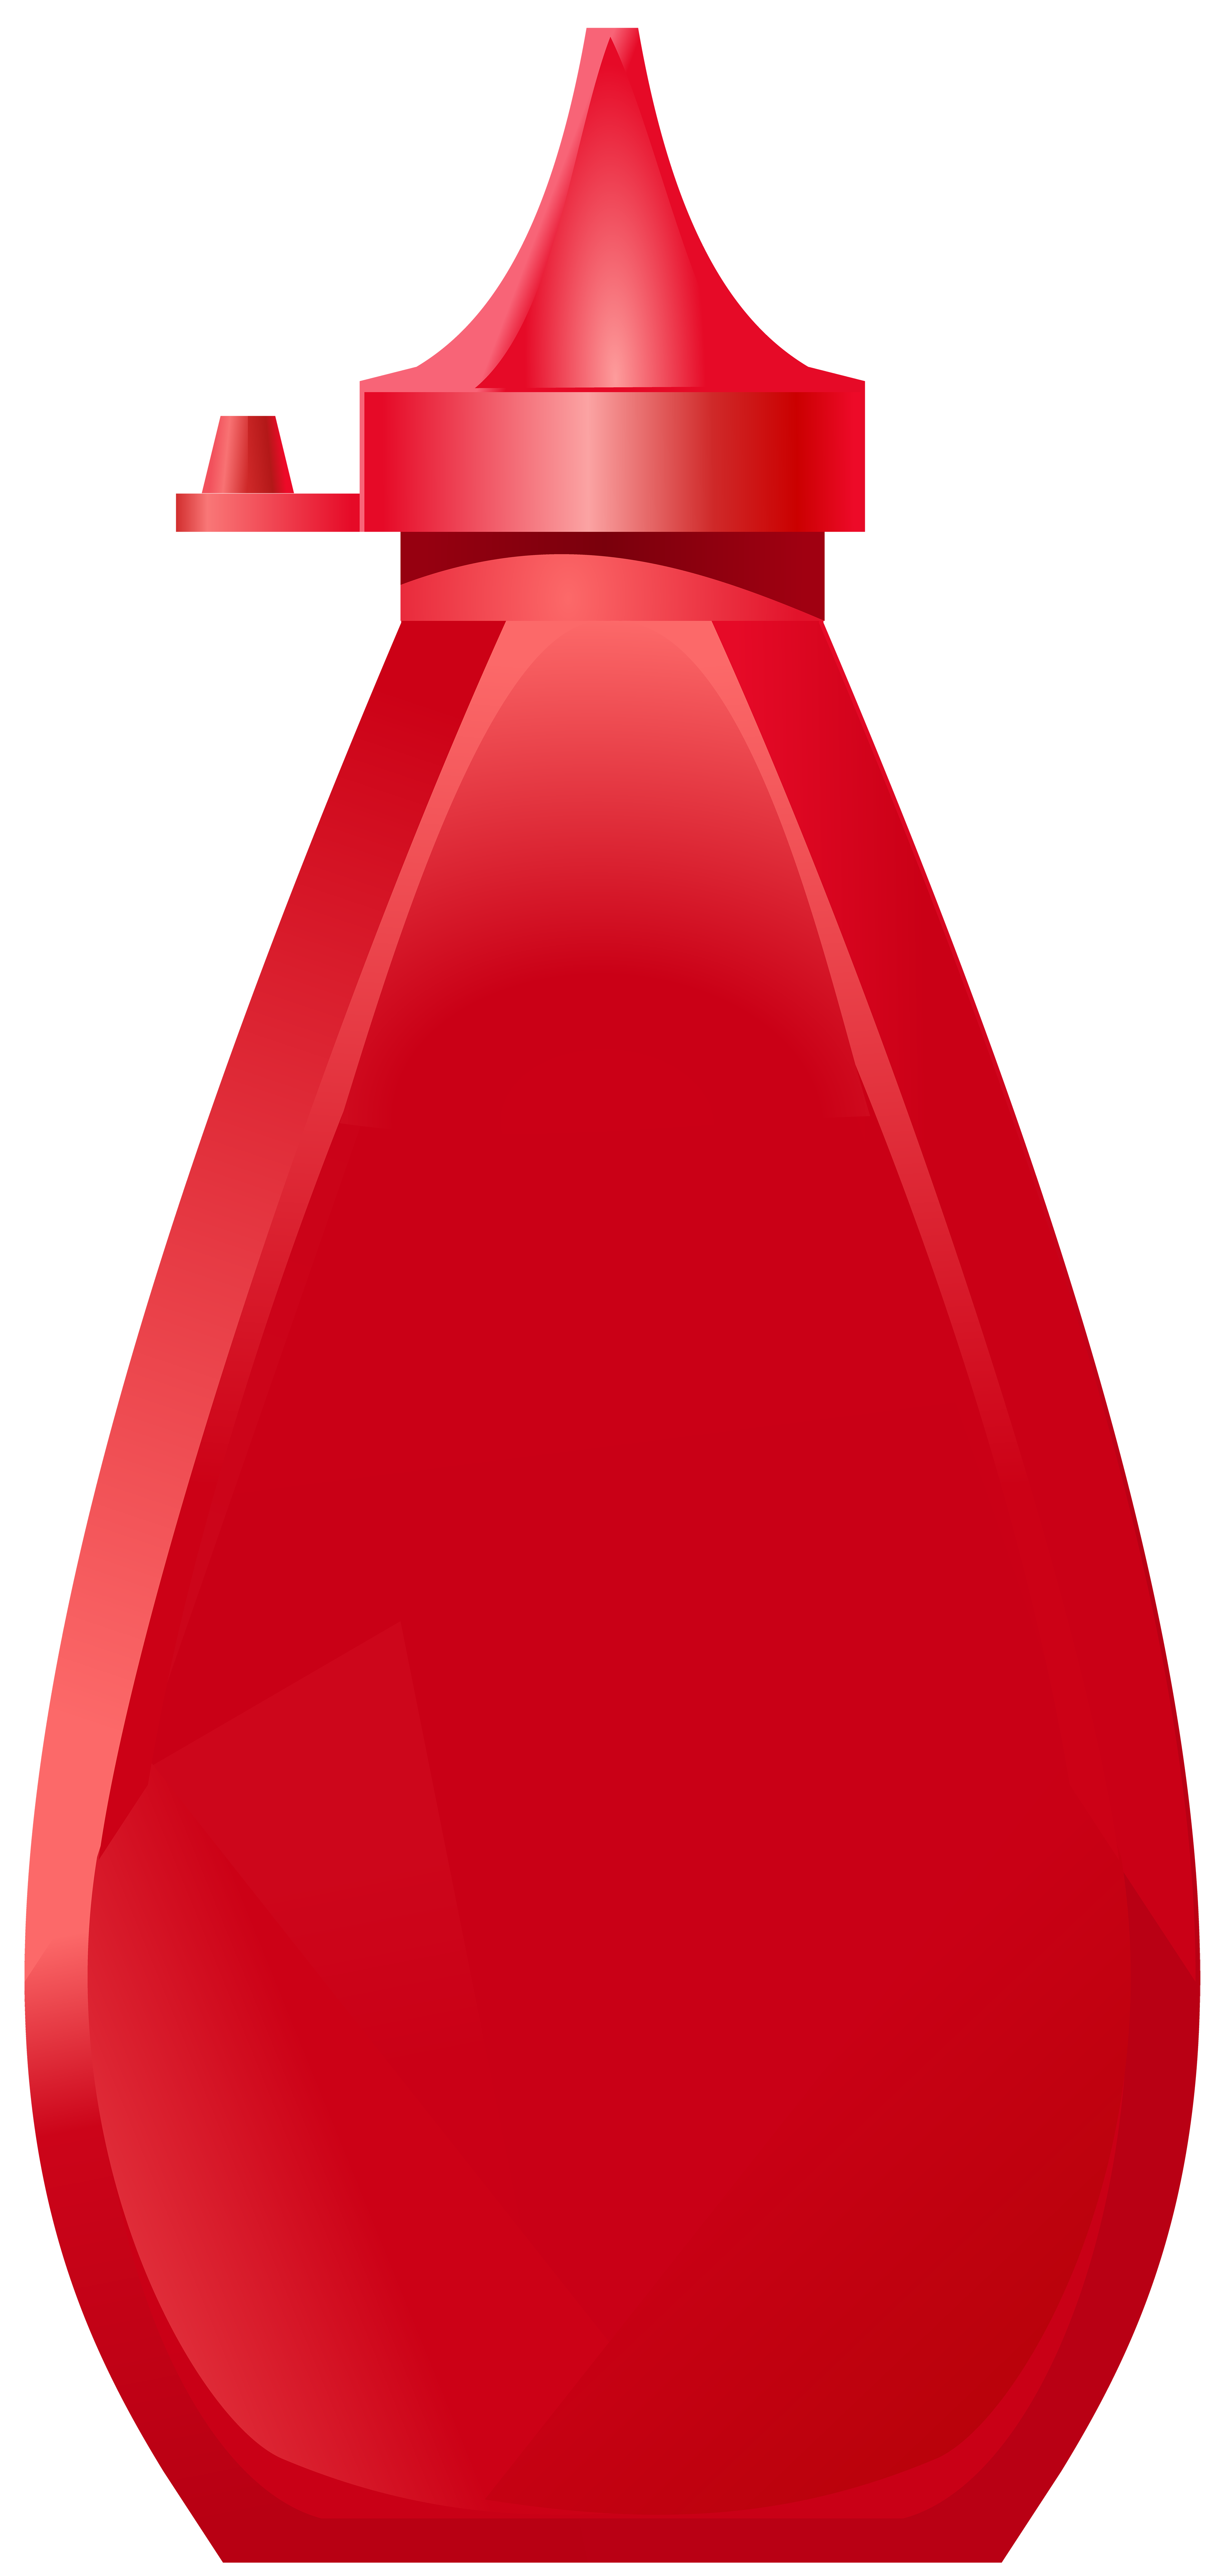 Ketchup Transparent Png Clip Art Image Gallery Yopriceville High Quality Images And Transparent Png Free Clipart